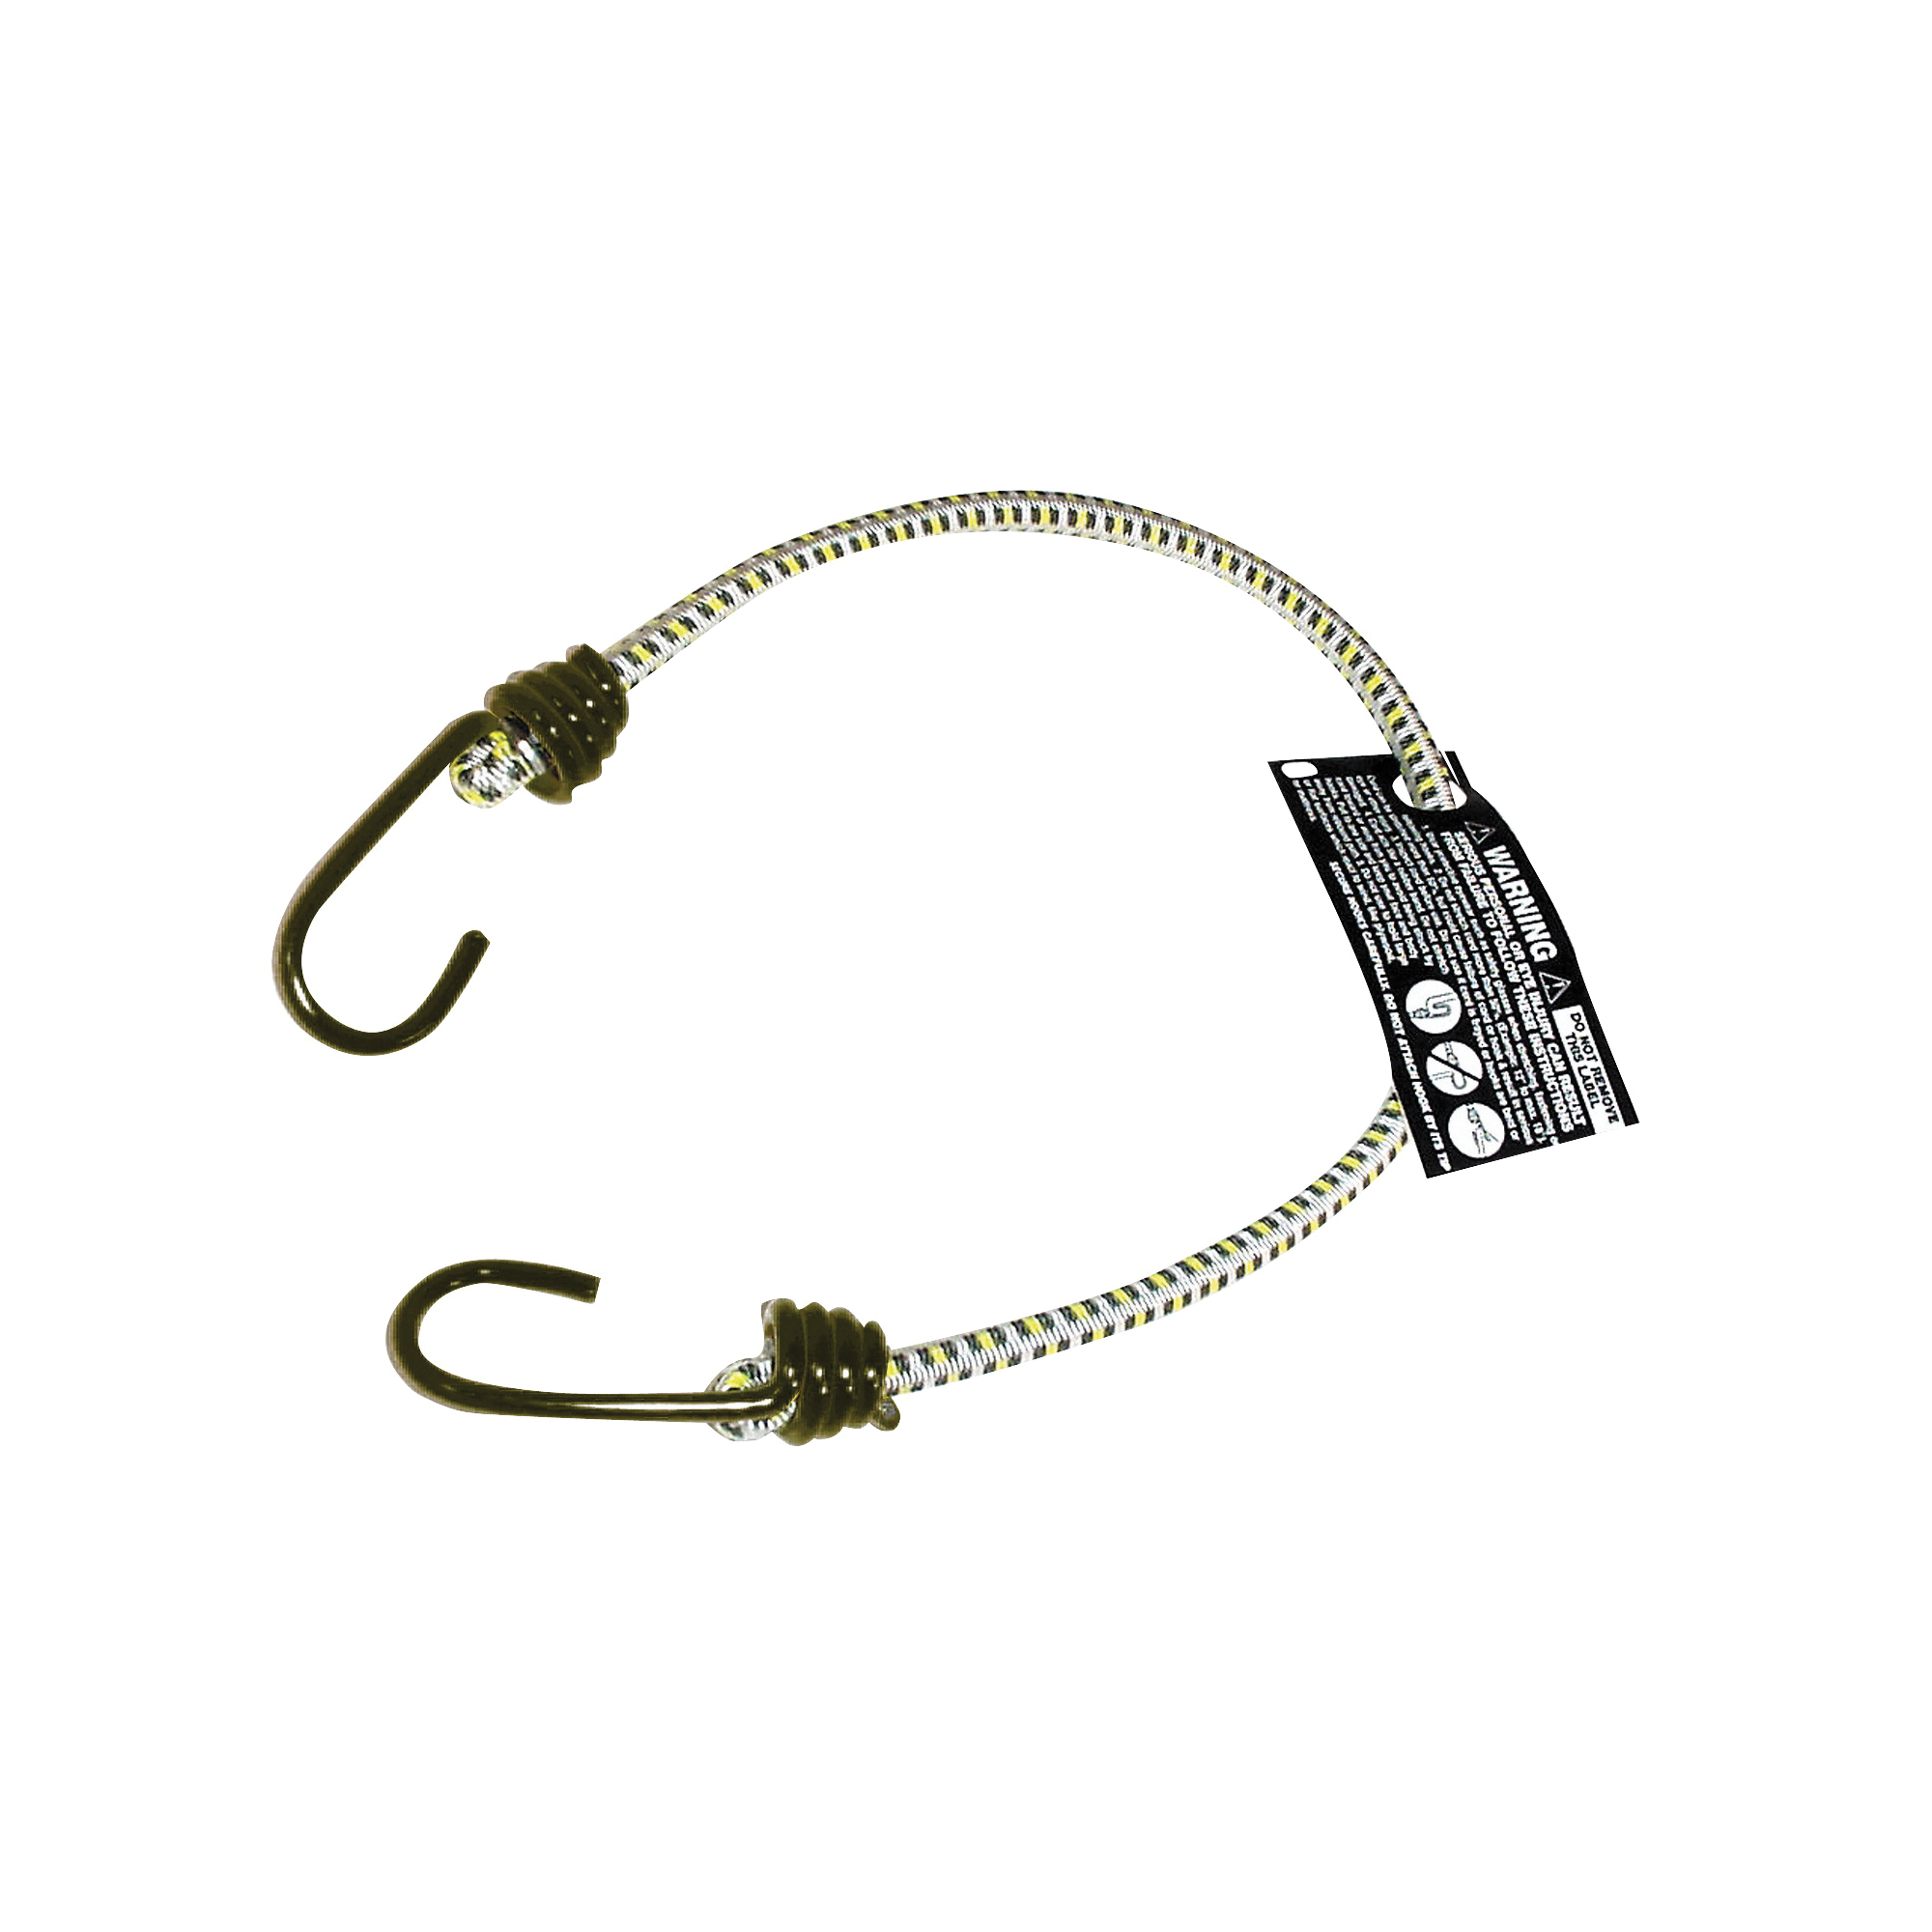 06019 Bungee Cord, 18 in L, Rubber, Hook End